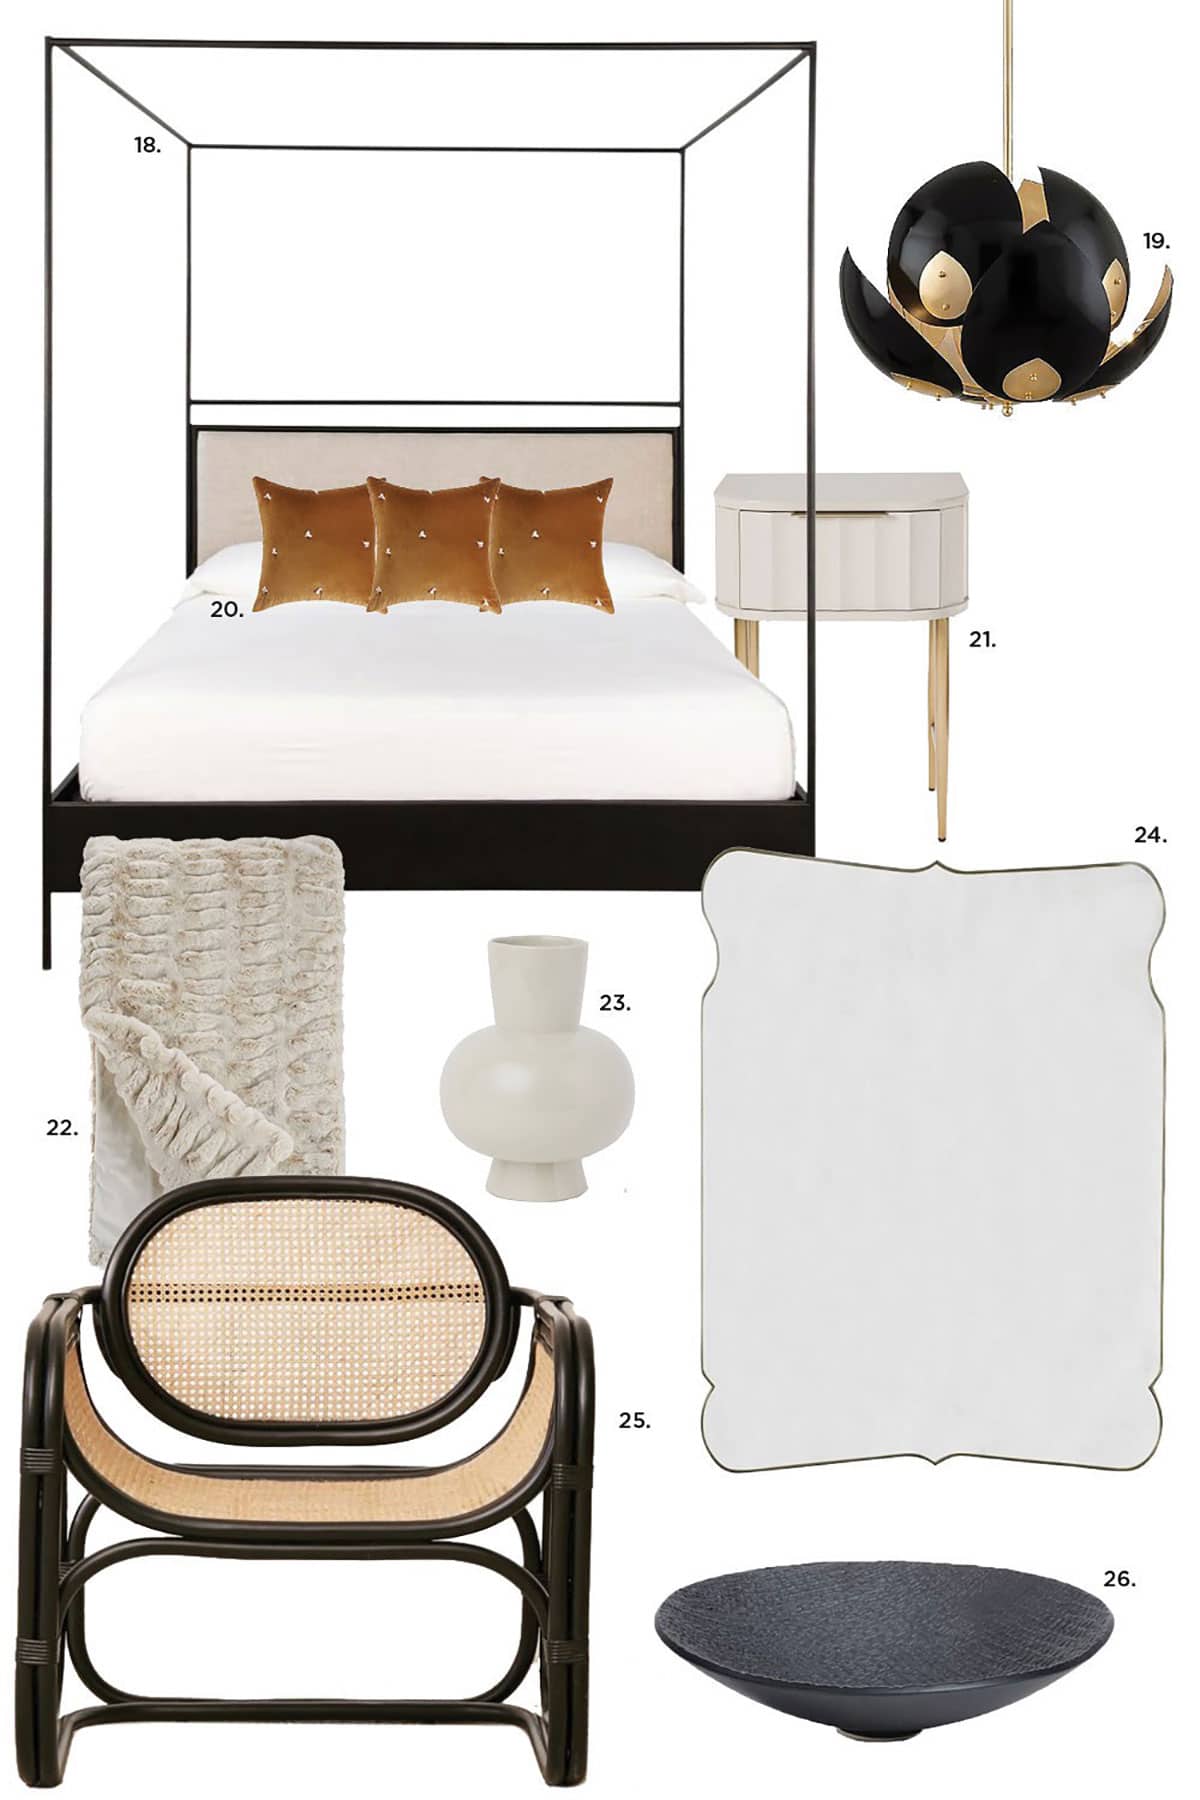 Decorating with neutrals in the bedroom